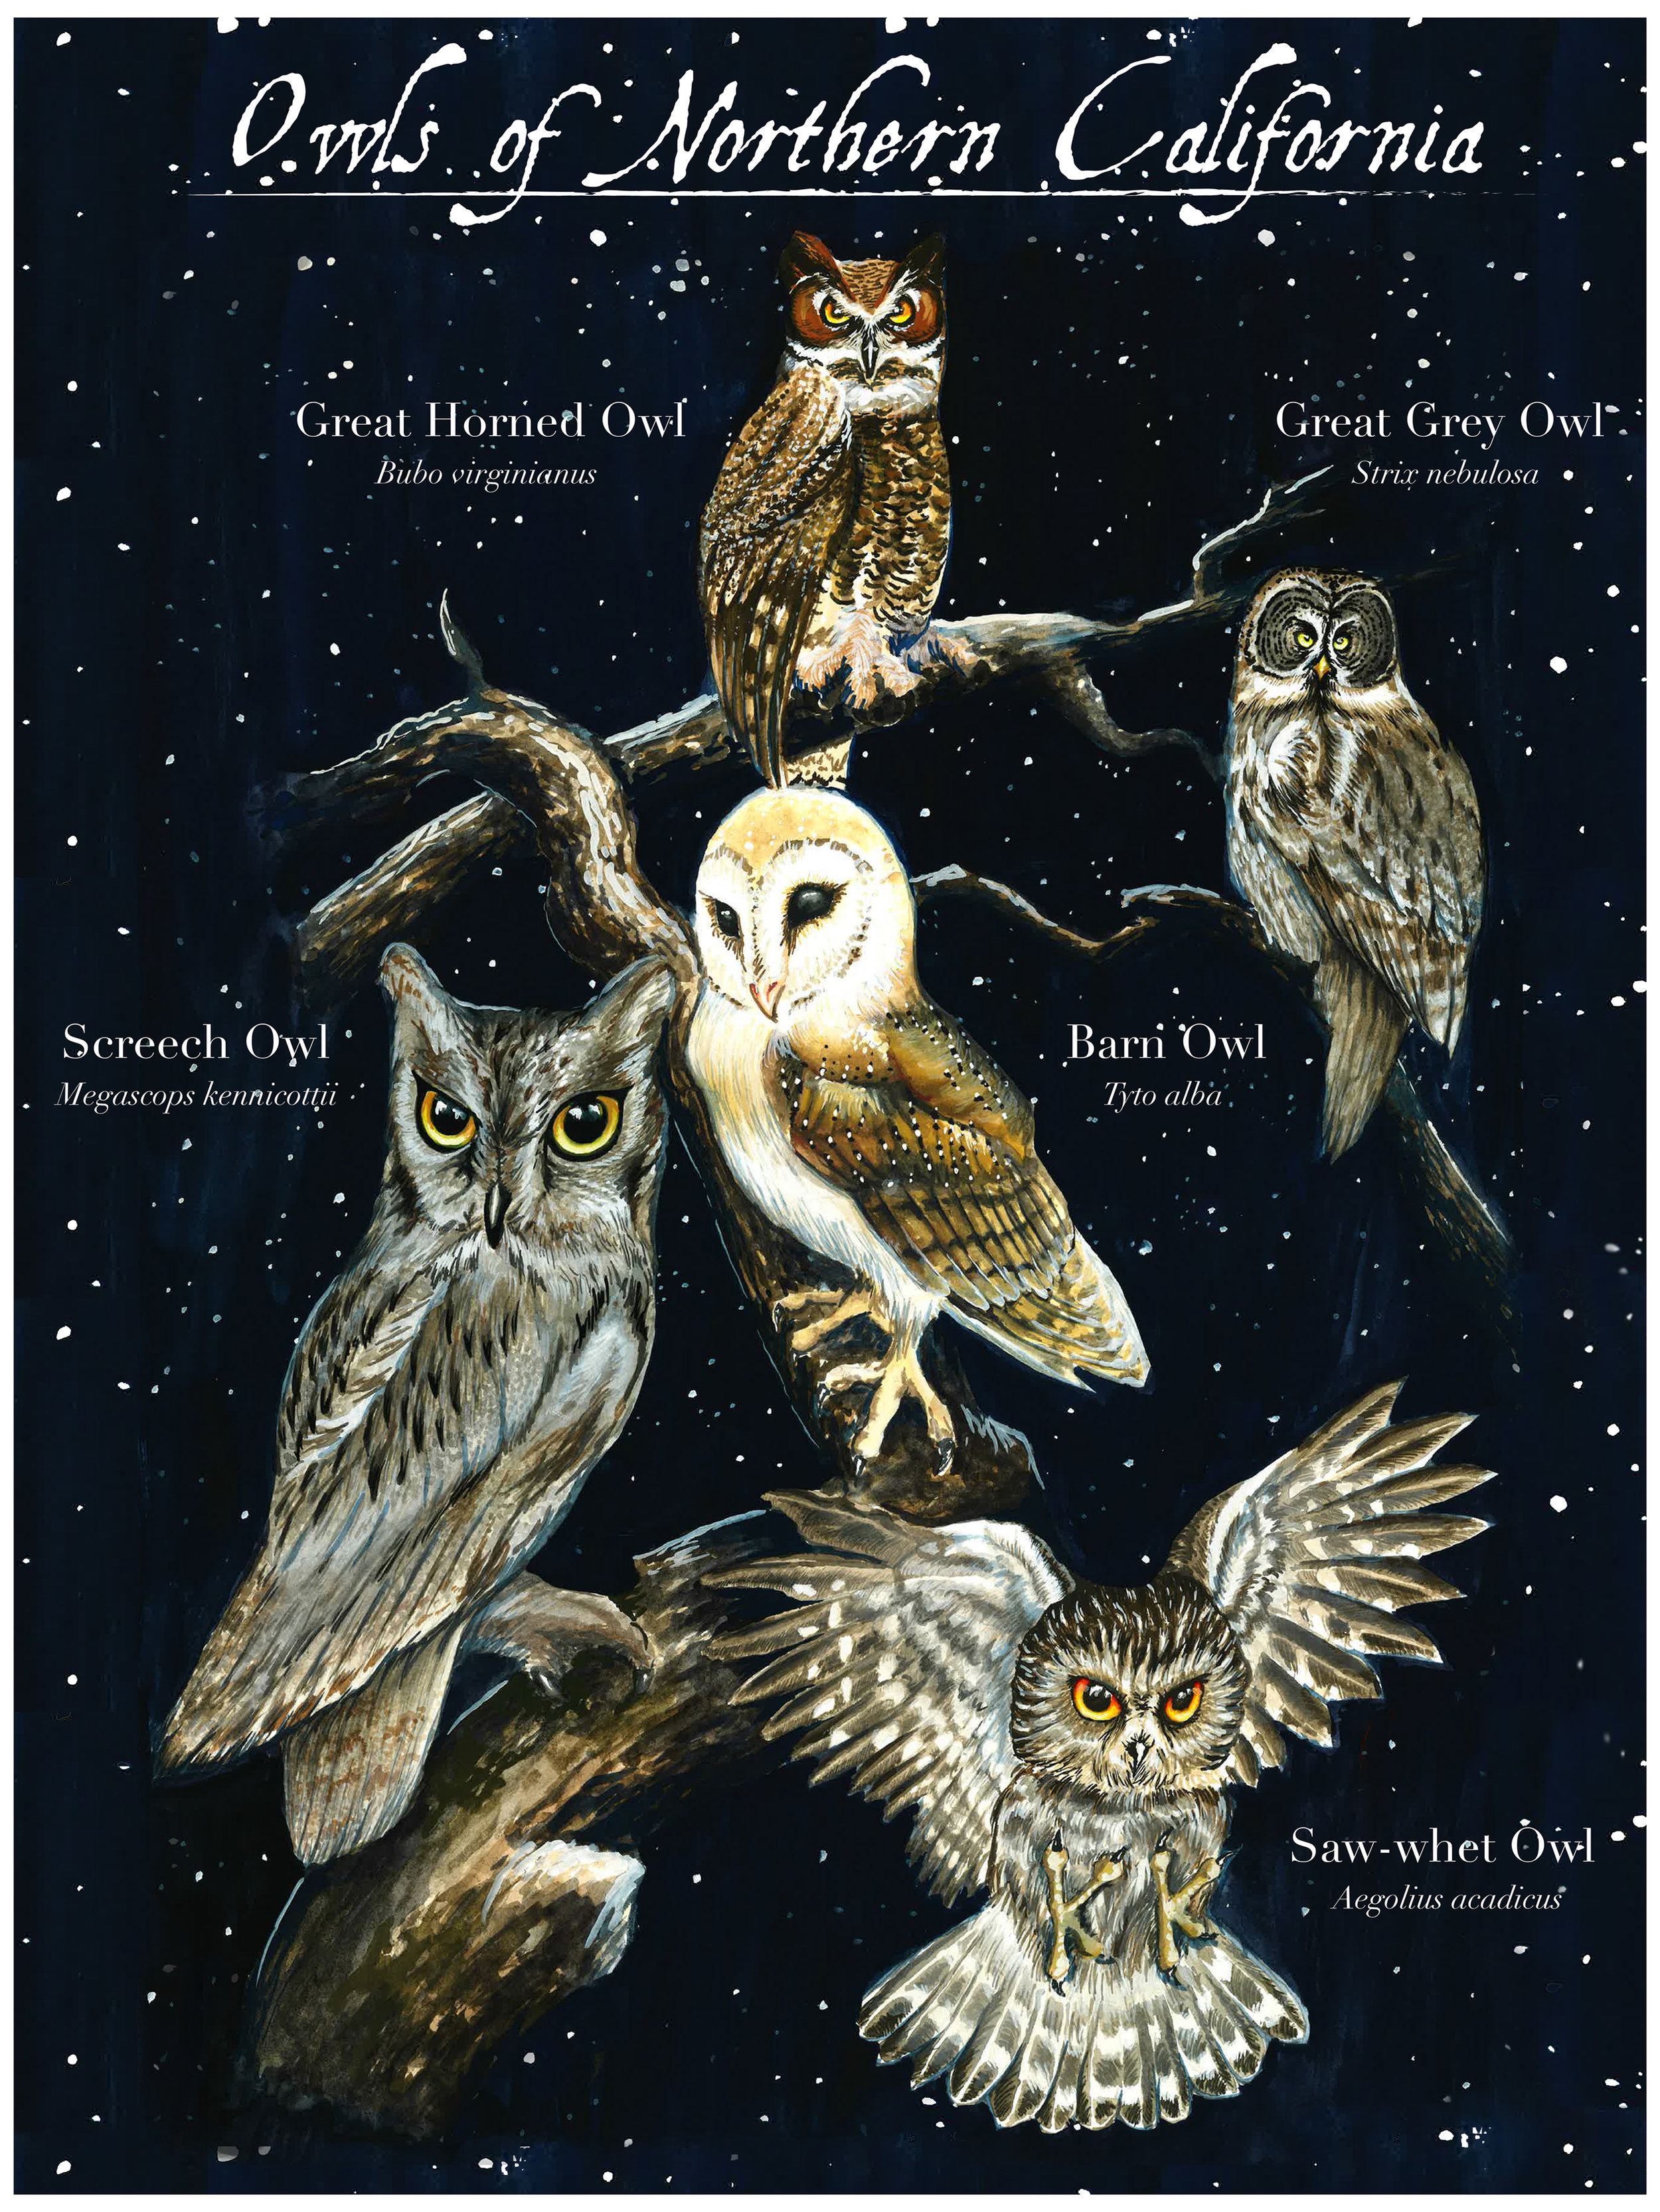 Owls of Northern California